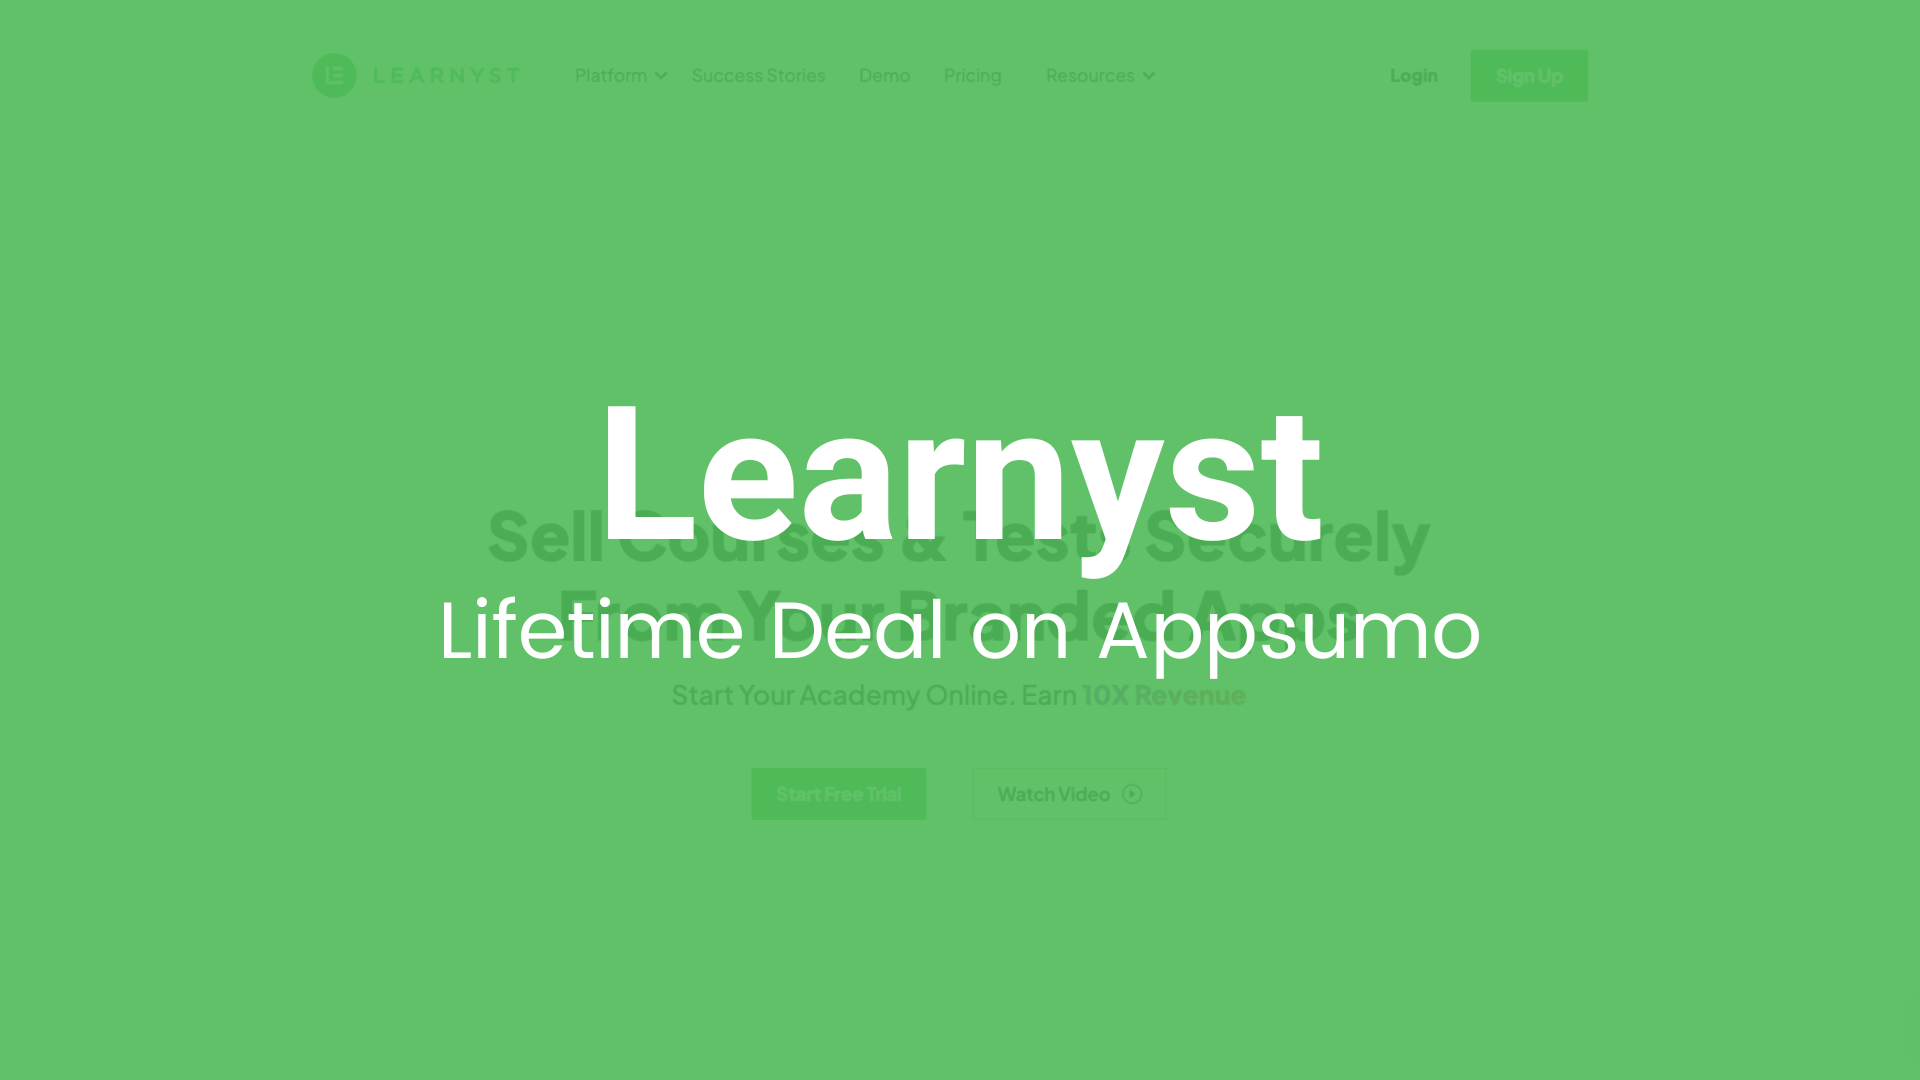 Learnyst: Secure Platform for Your Online Course Business